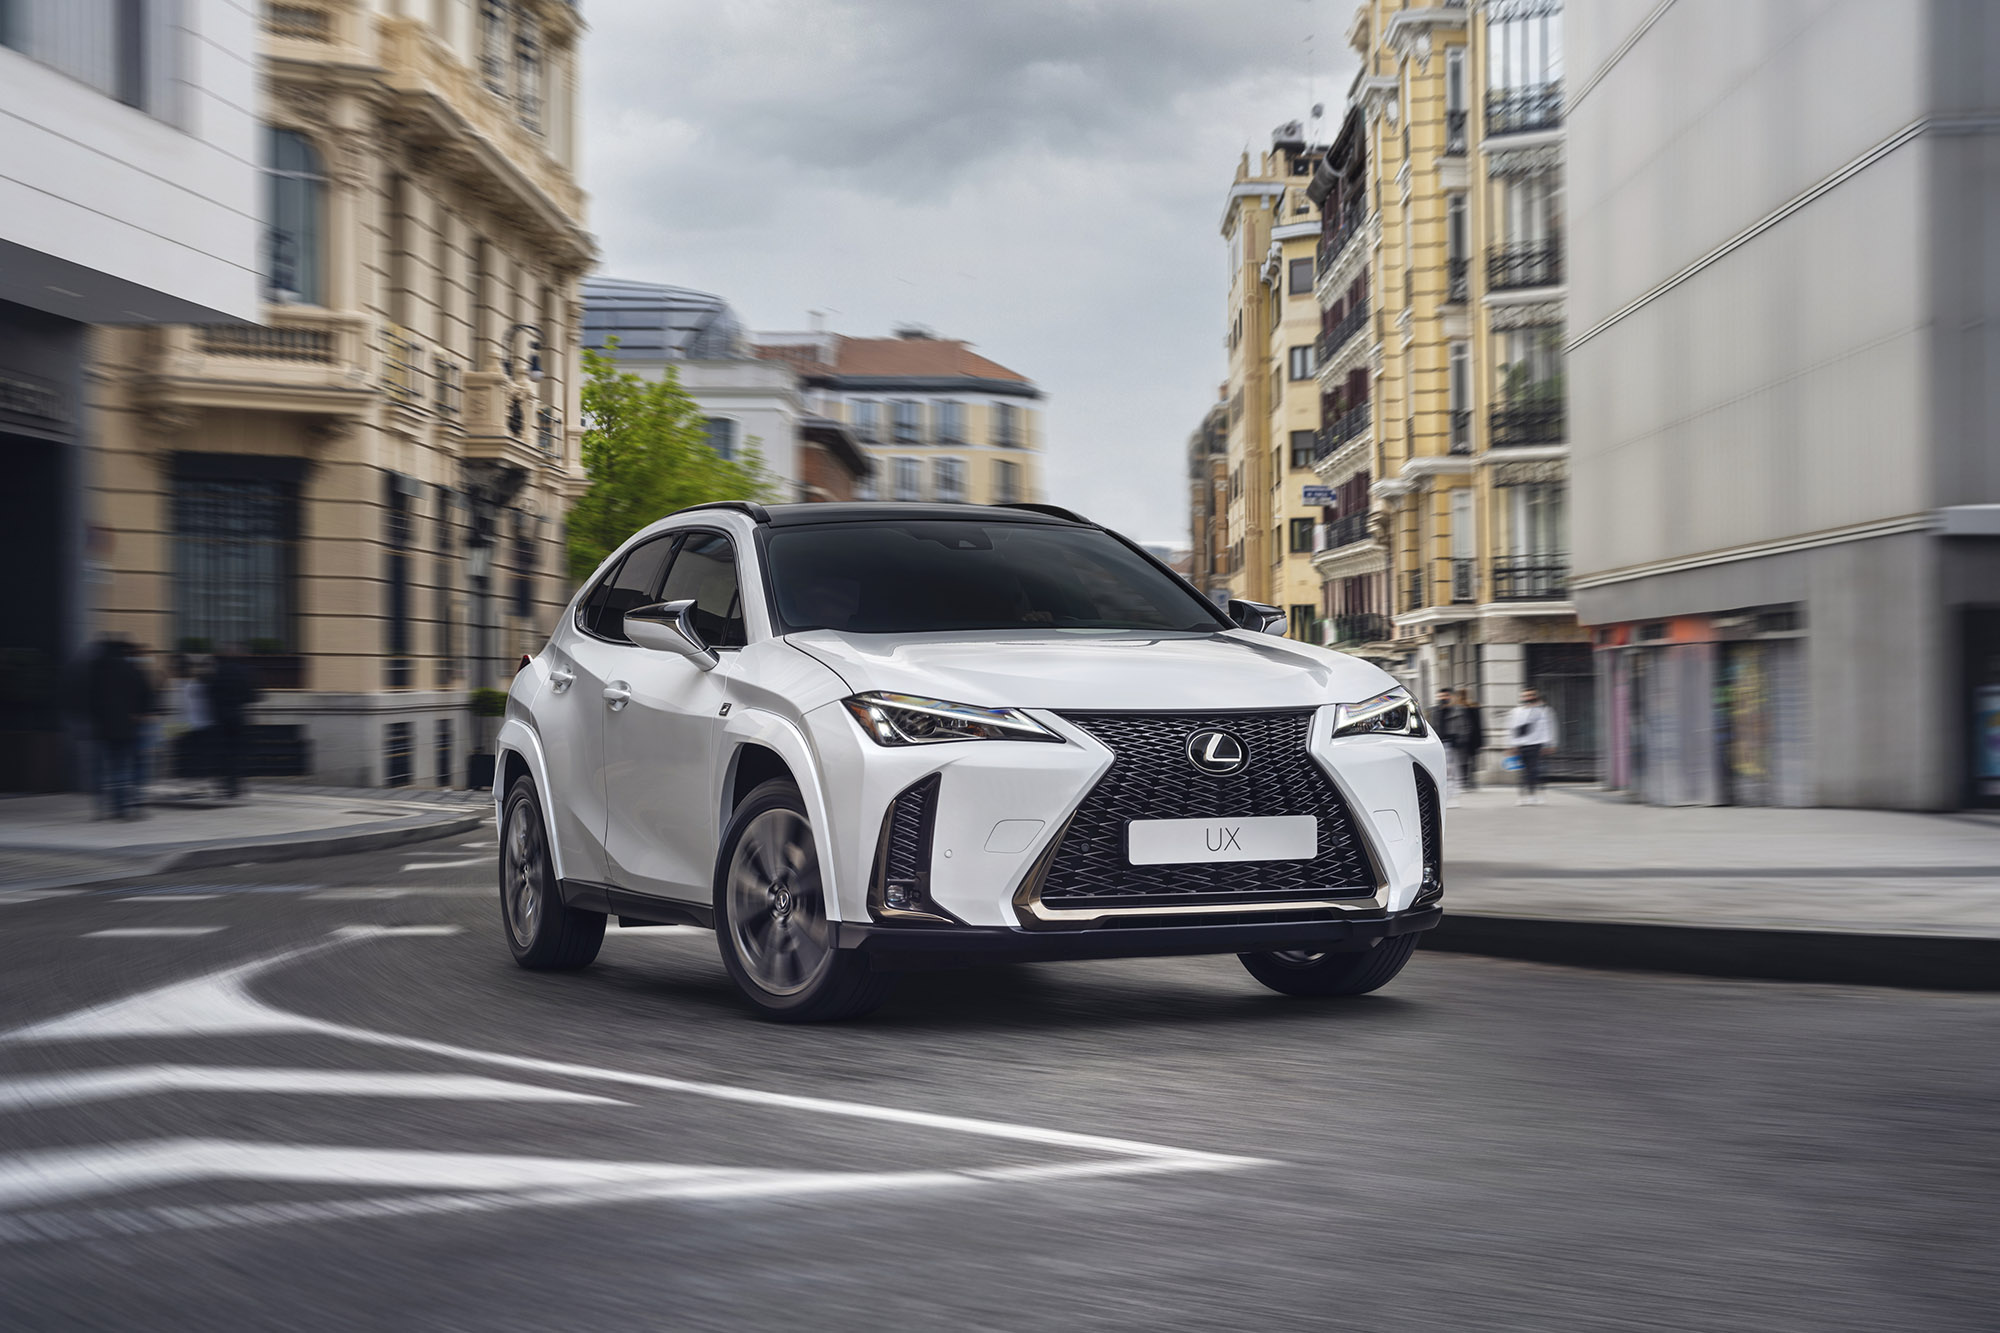 2023 Lexus UX 250h F Sport in white driving on a city street